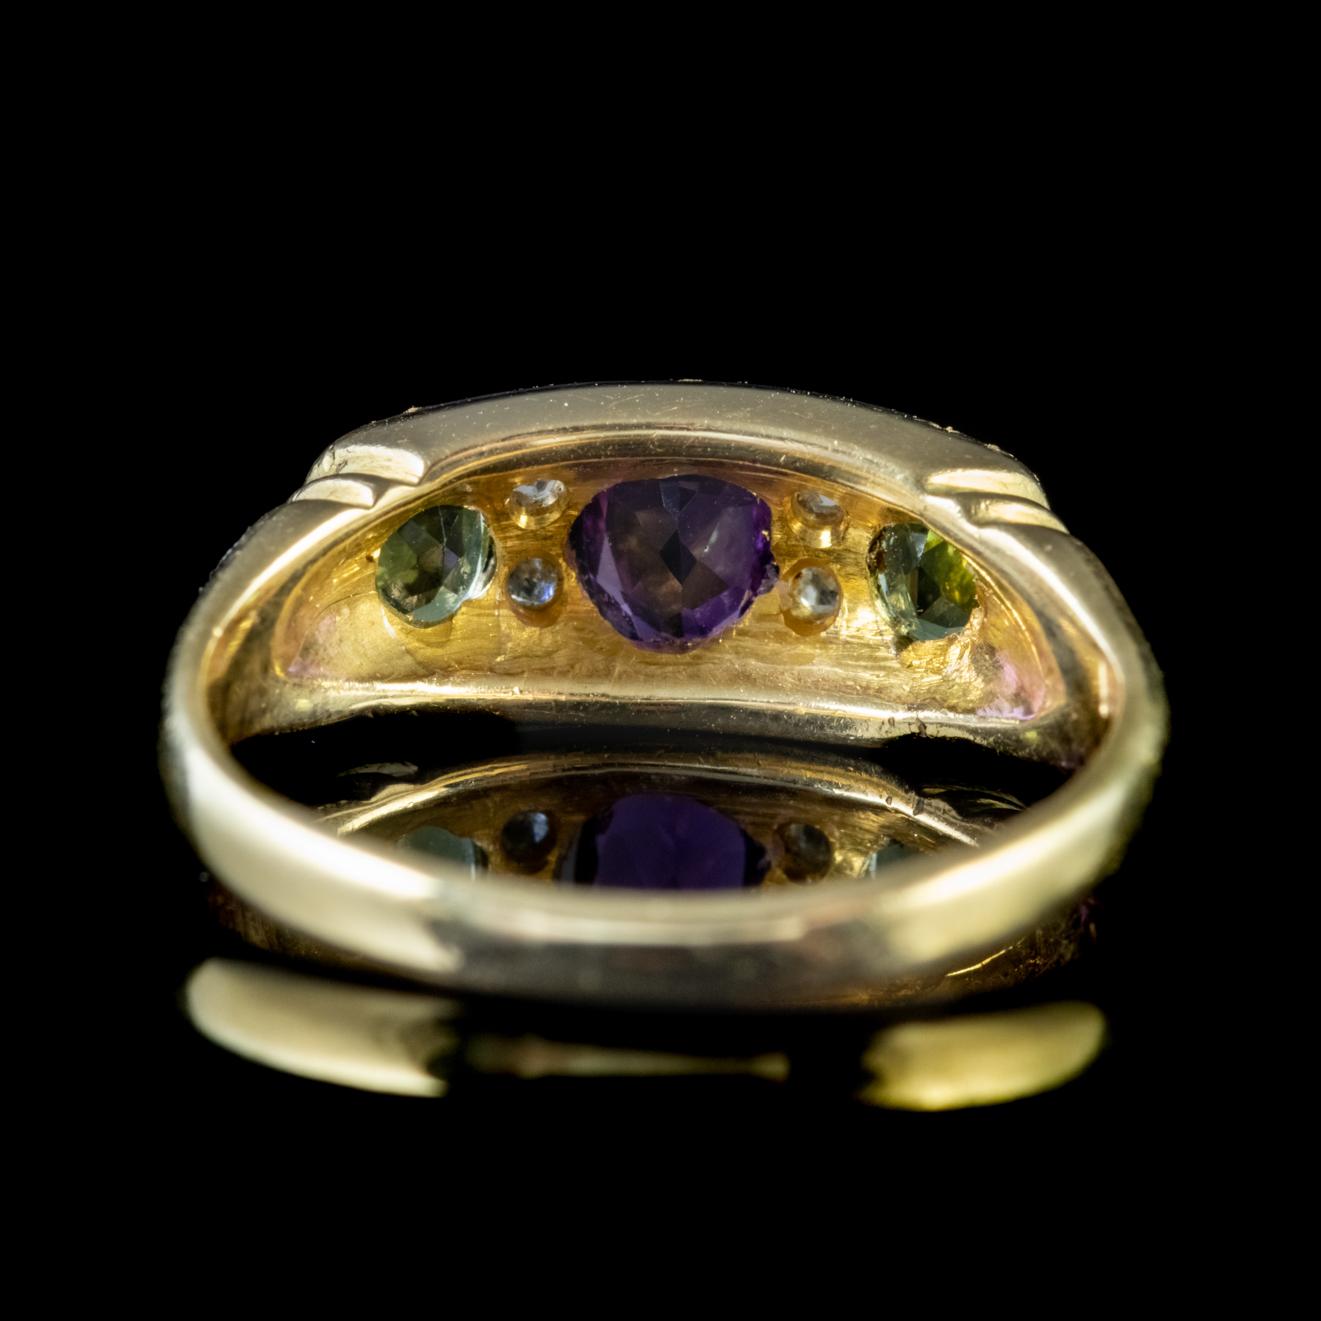 Women's Antique Edwardian Suffragette 18 Carat Gold Dated 1905 Ring For Sale